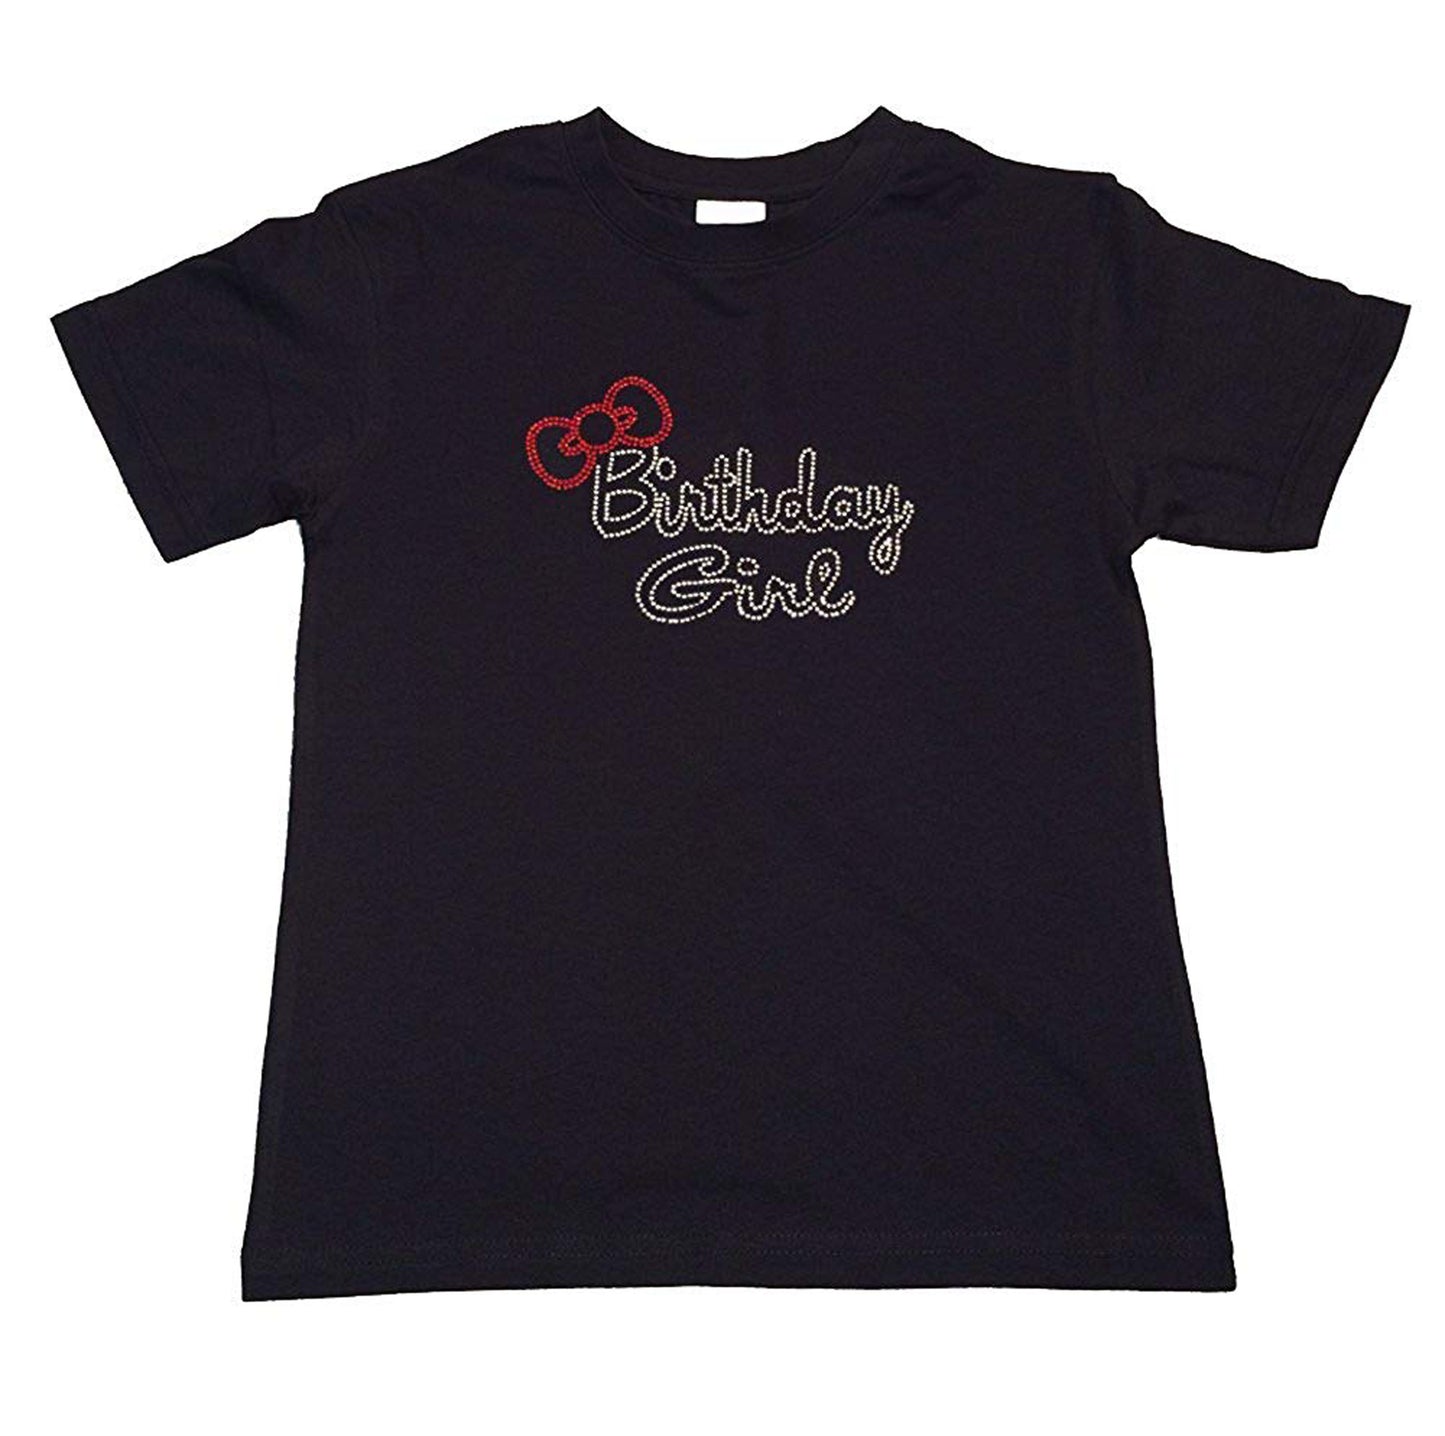 Girls Rhinestone T-Shirt " Birthday Girl with Red Bow " Size 3 to 14 Available